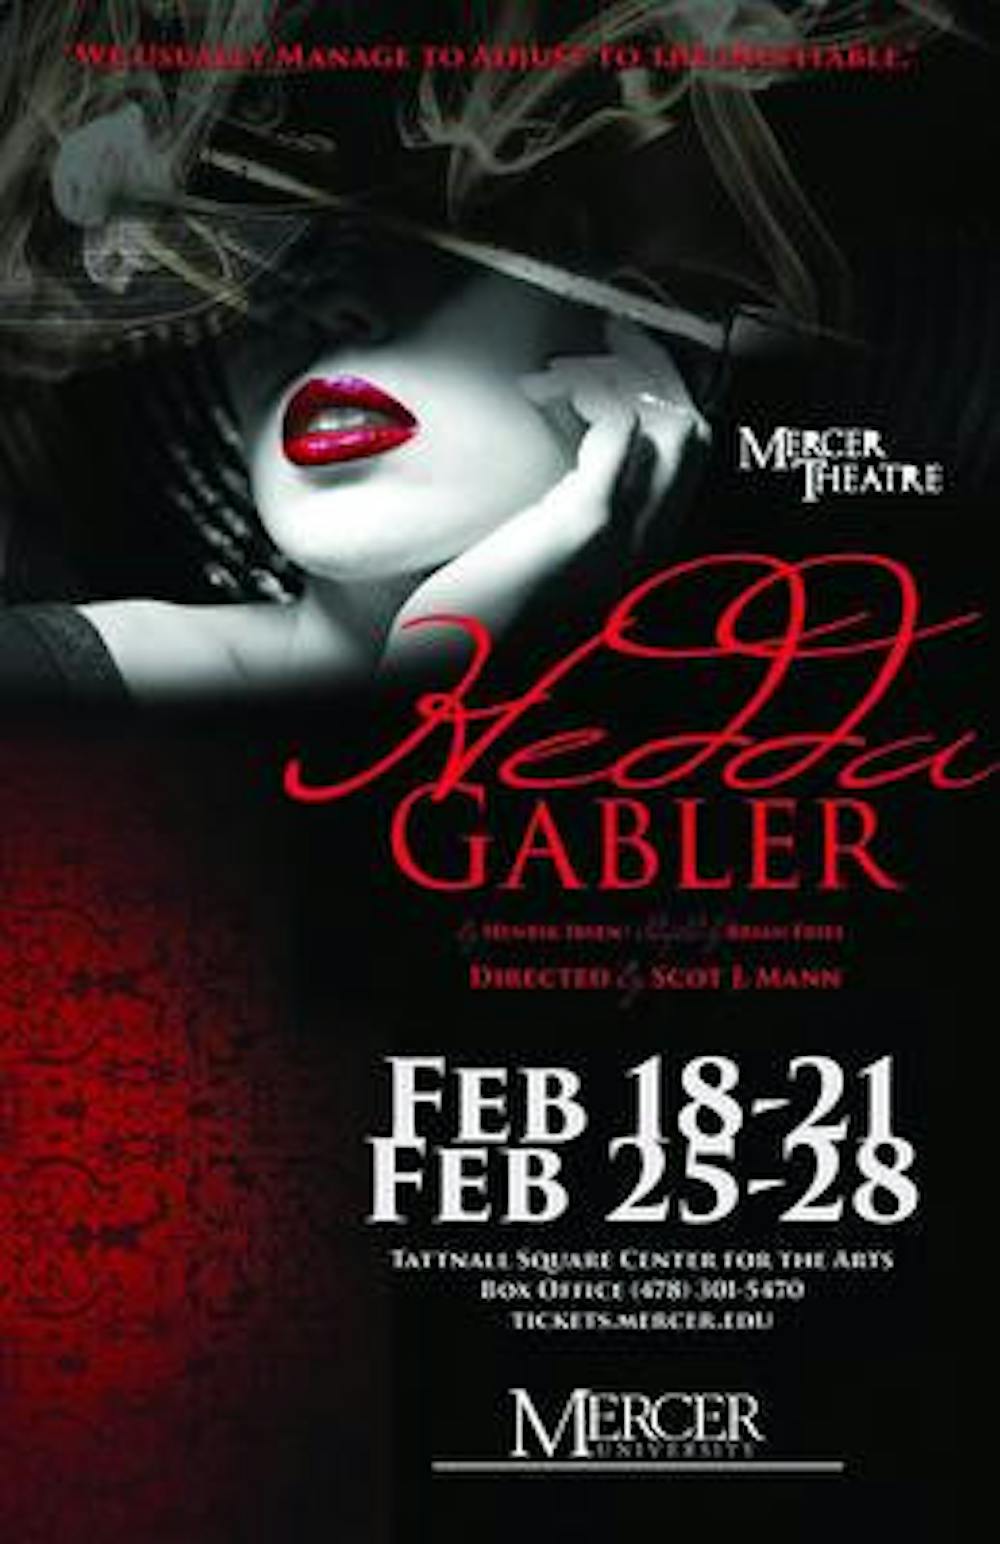 Provided By the Mercer Players
The Mercer Players' production of "Hedda Gabler" will explore the themes of tragedy and lost love.